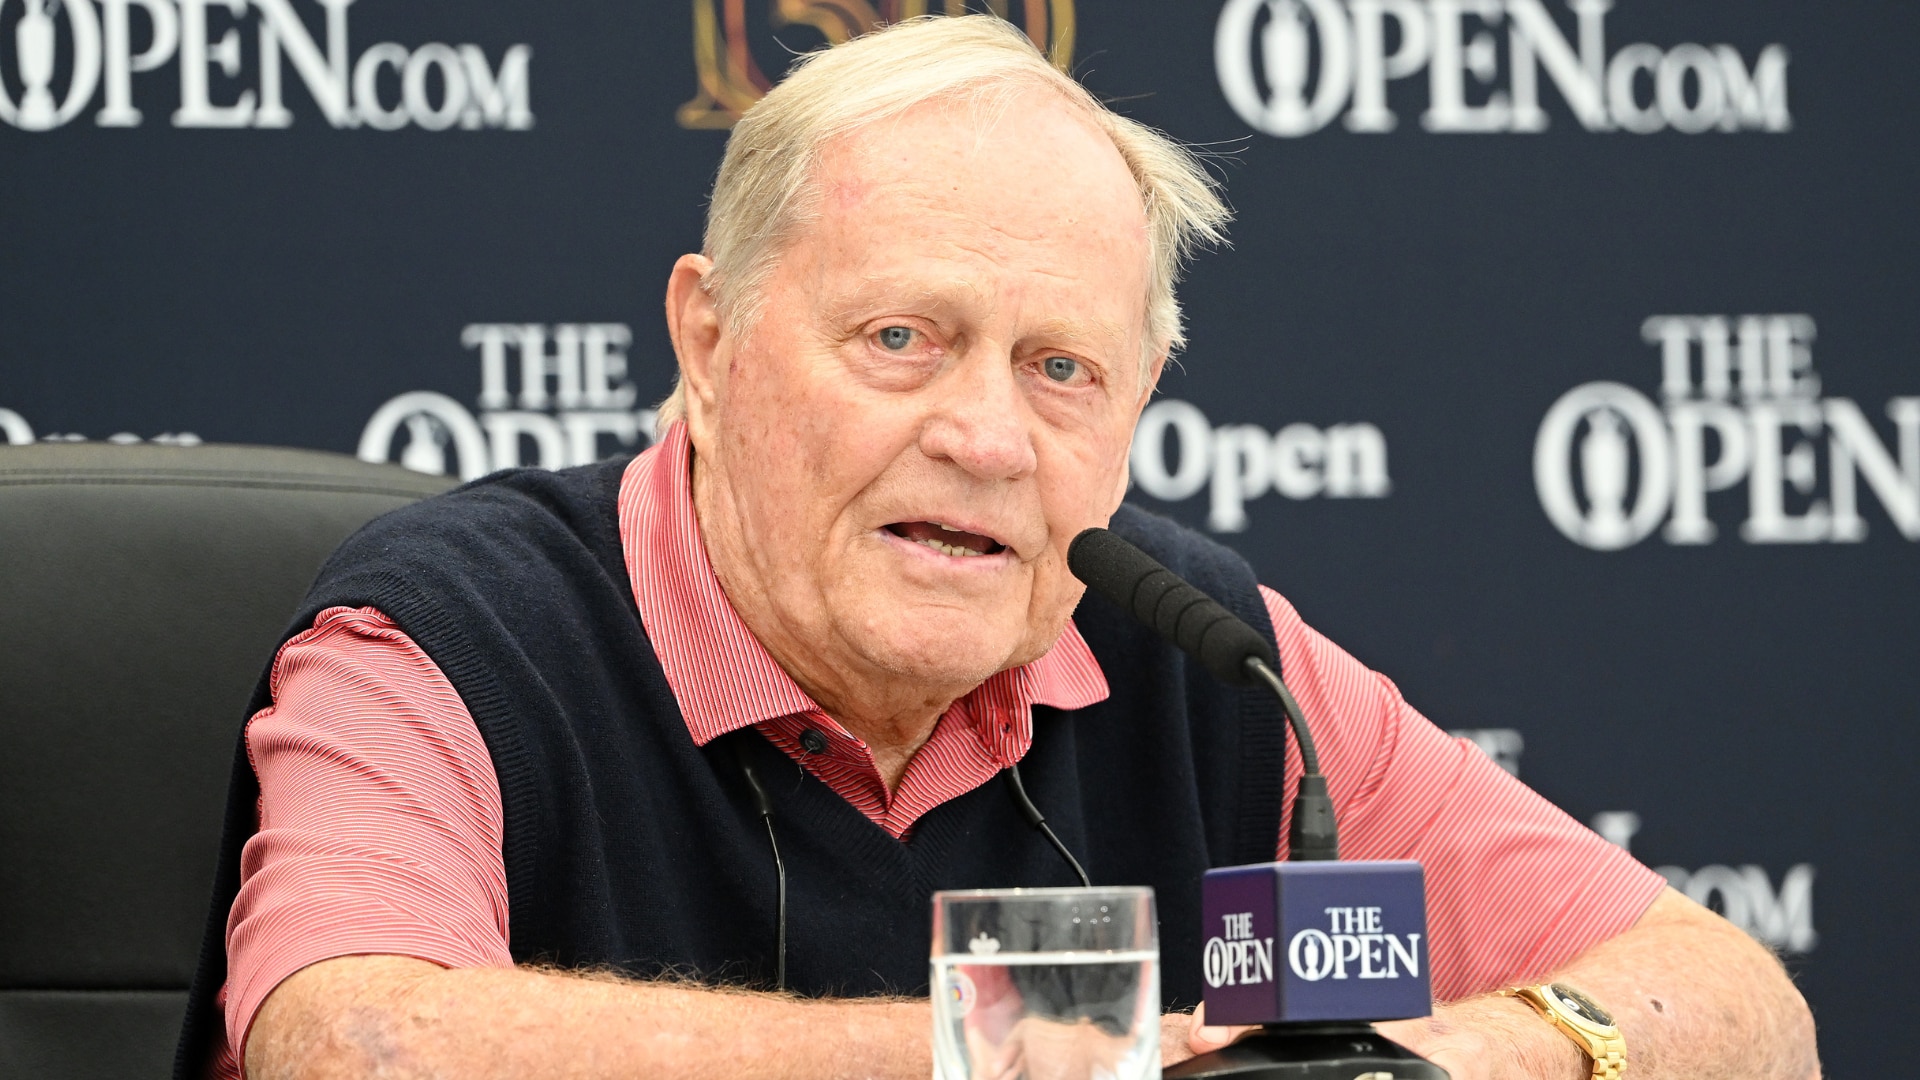 Court rules Jack Nicklaus can use name for course design in lawsuit with Nicklaus Companies